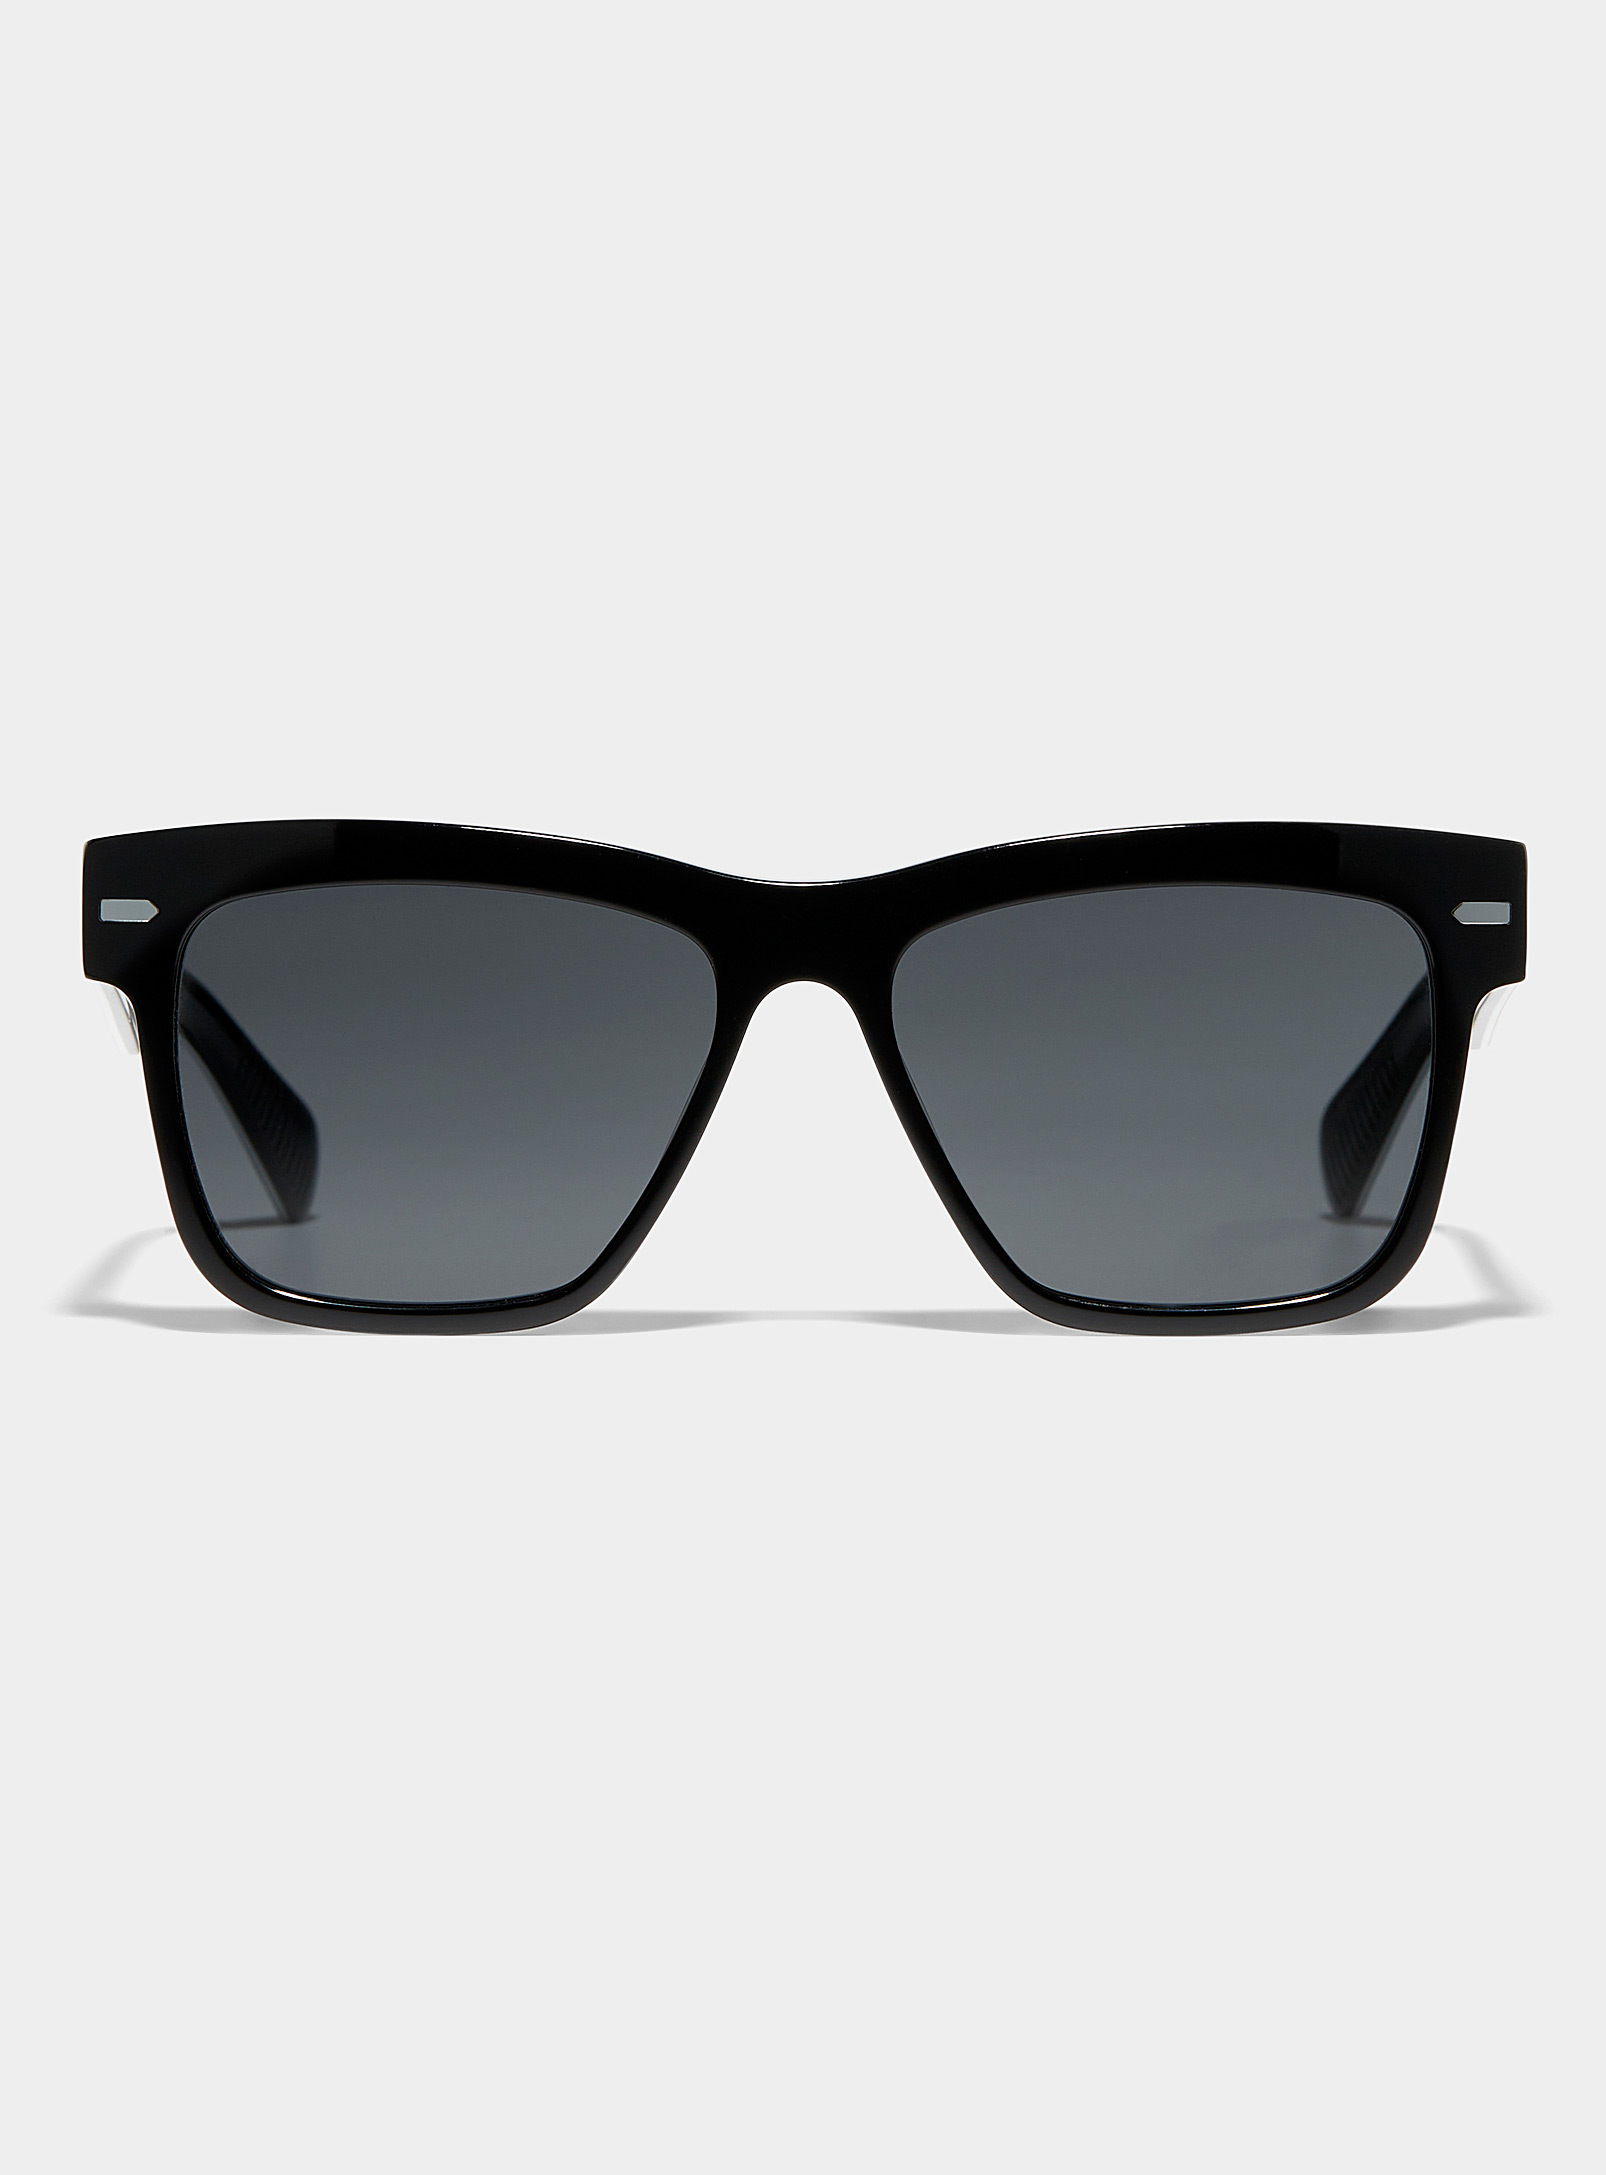 Spitfire Cut Eighty Eight Square Sunglasses In Black